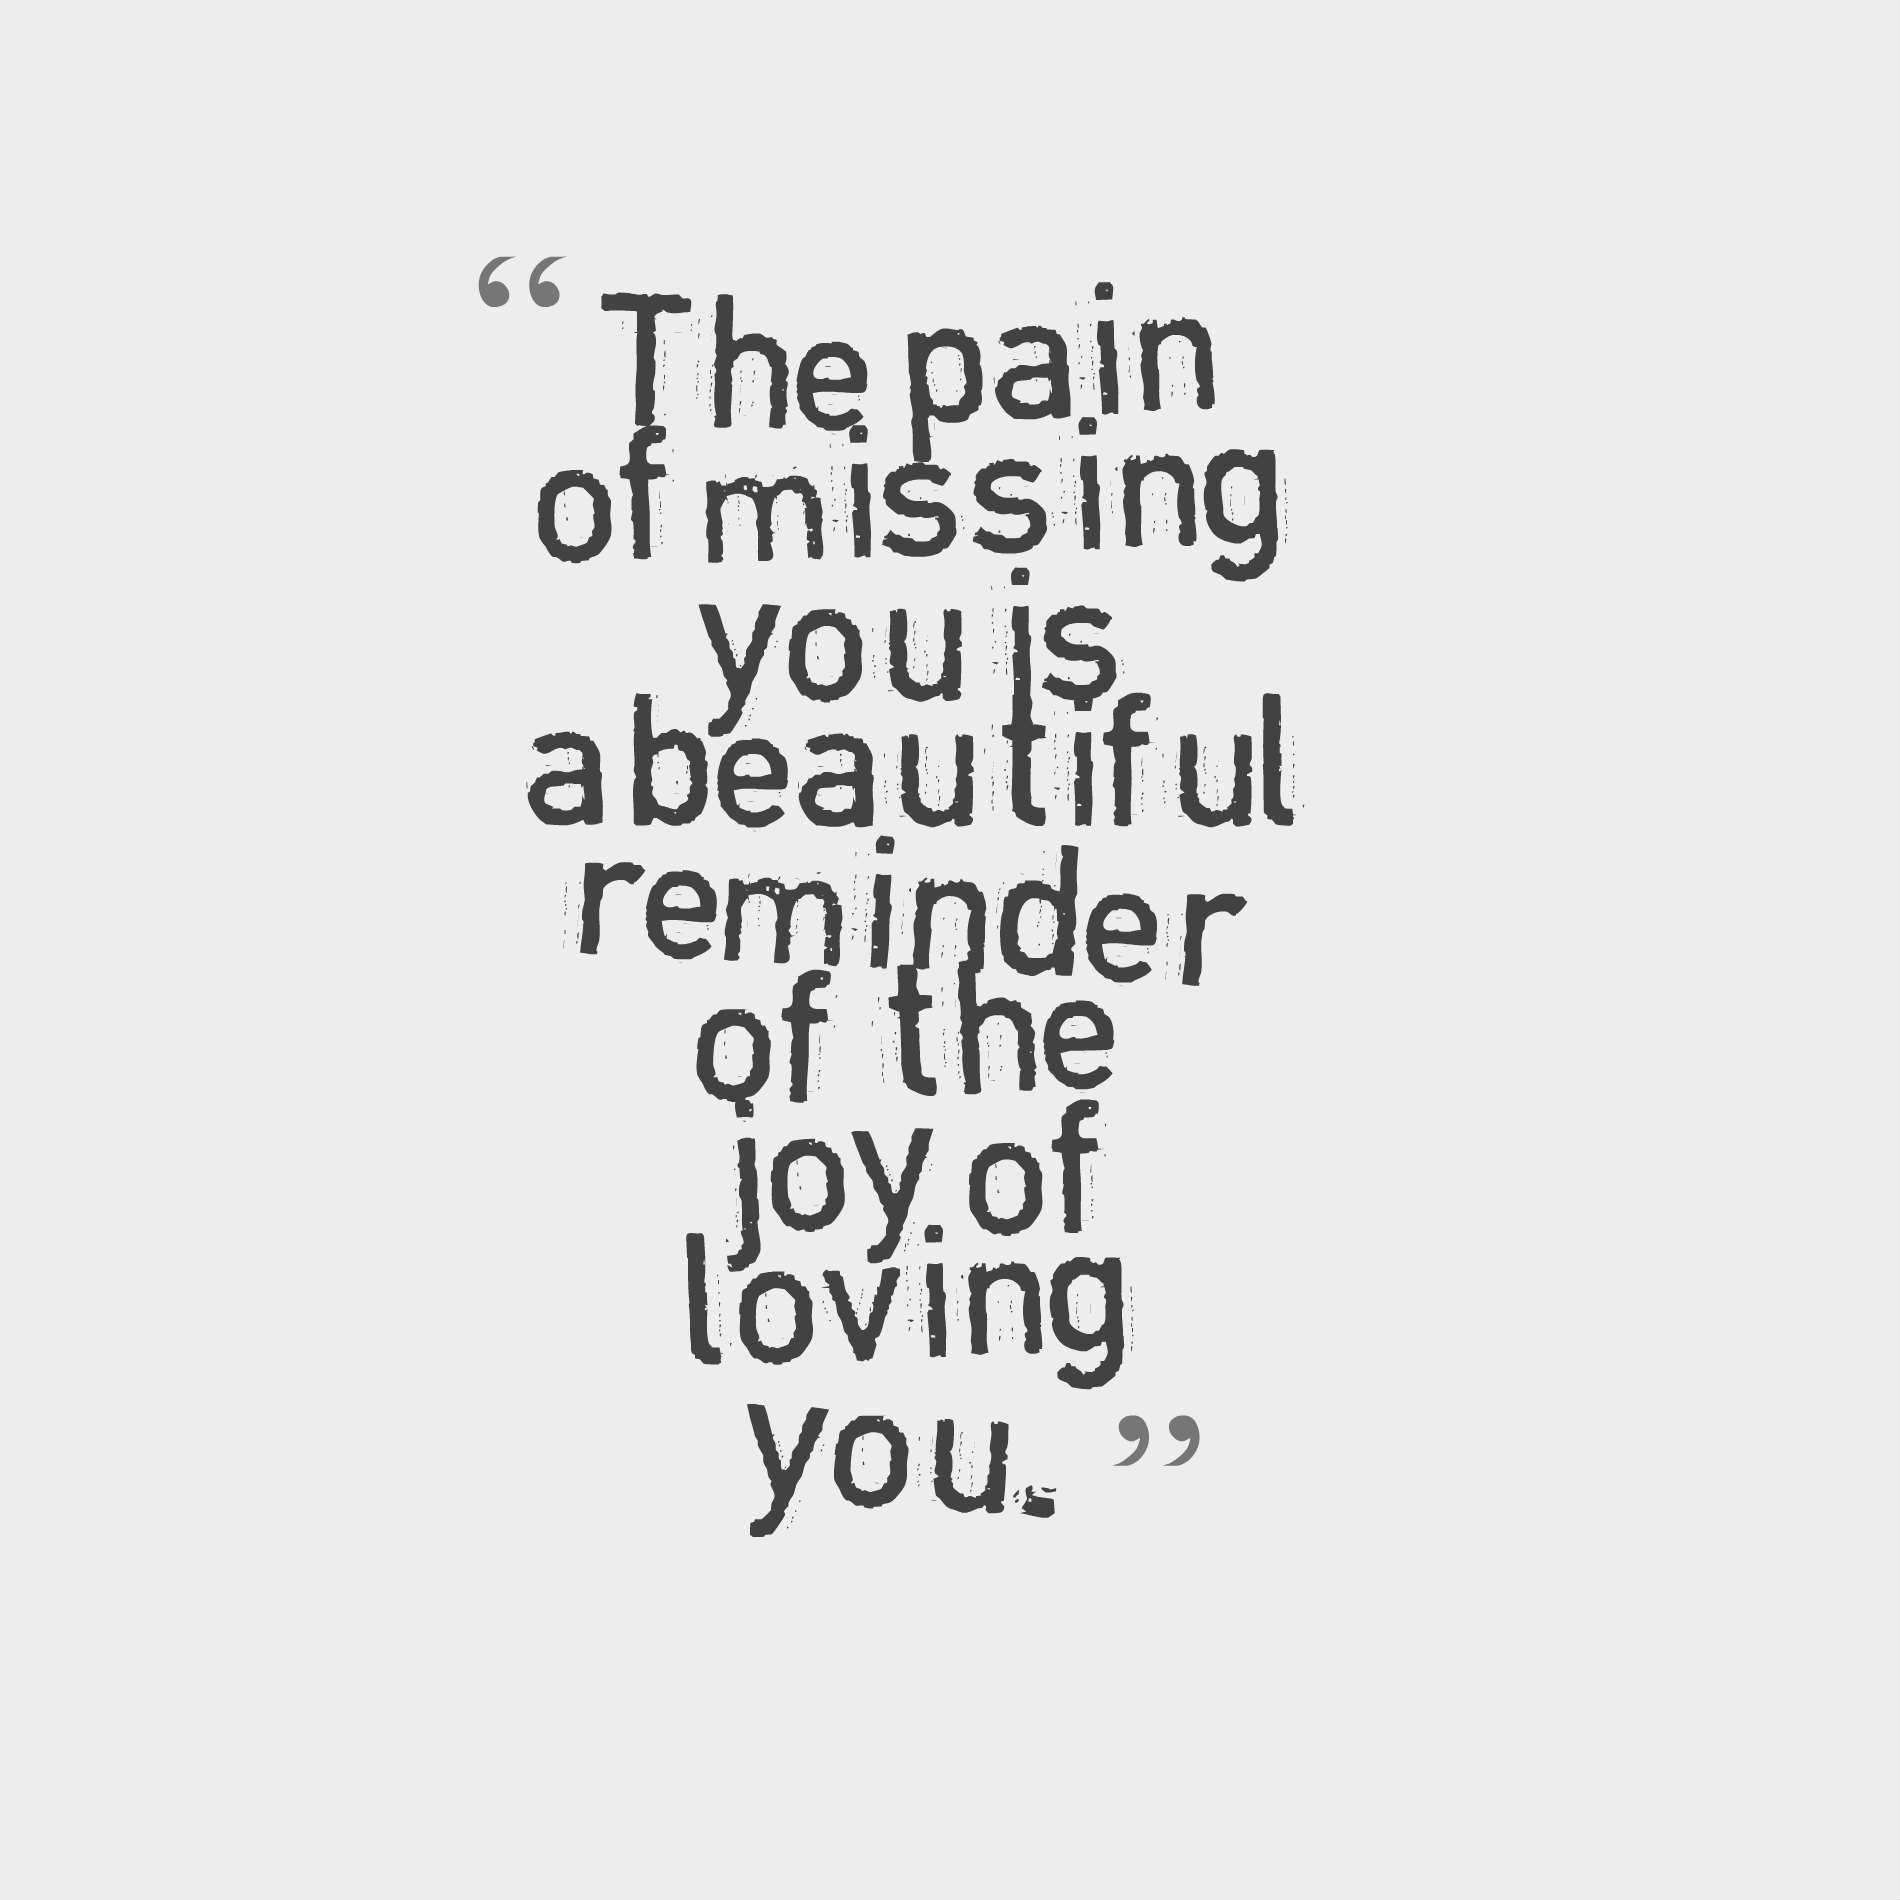 The pain of missing you is a beautiful reminder of the joy of loving you.